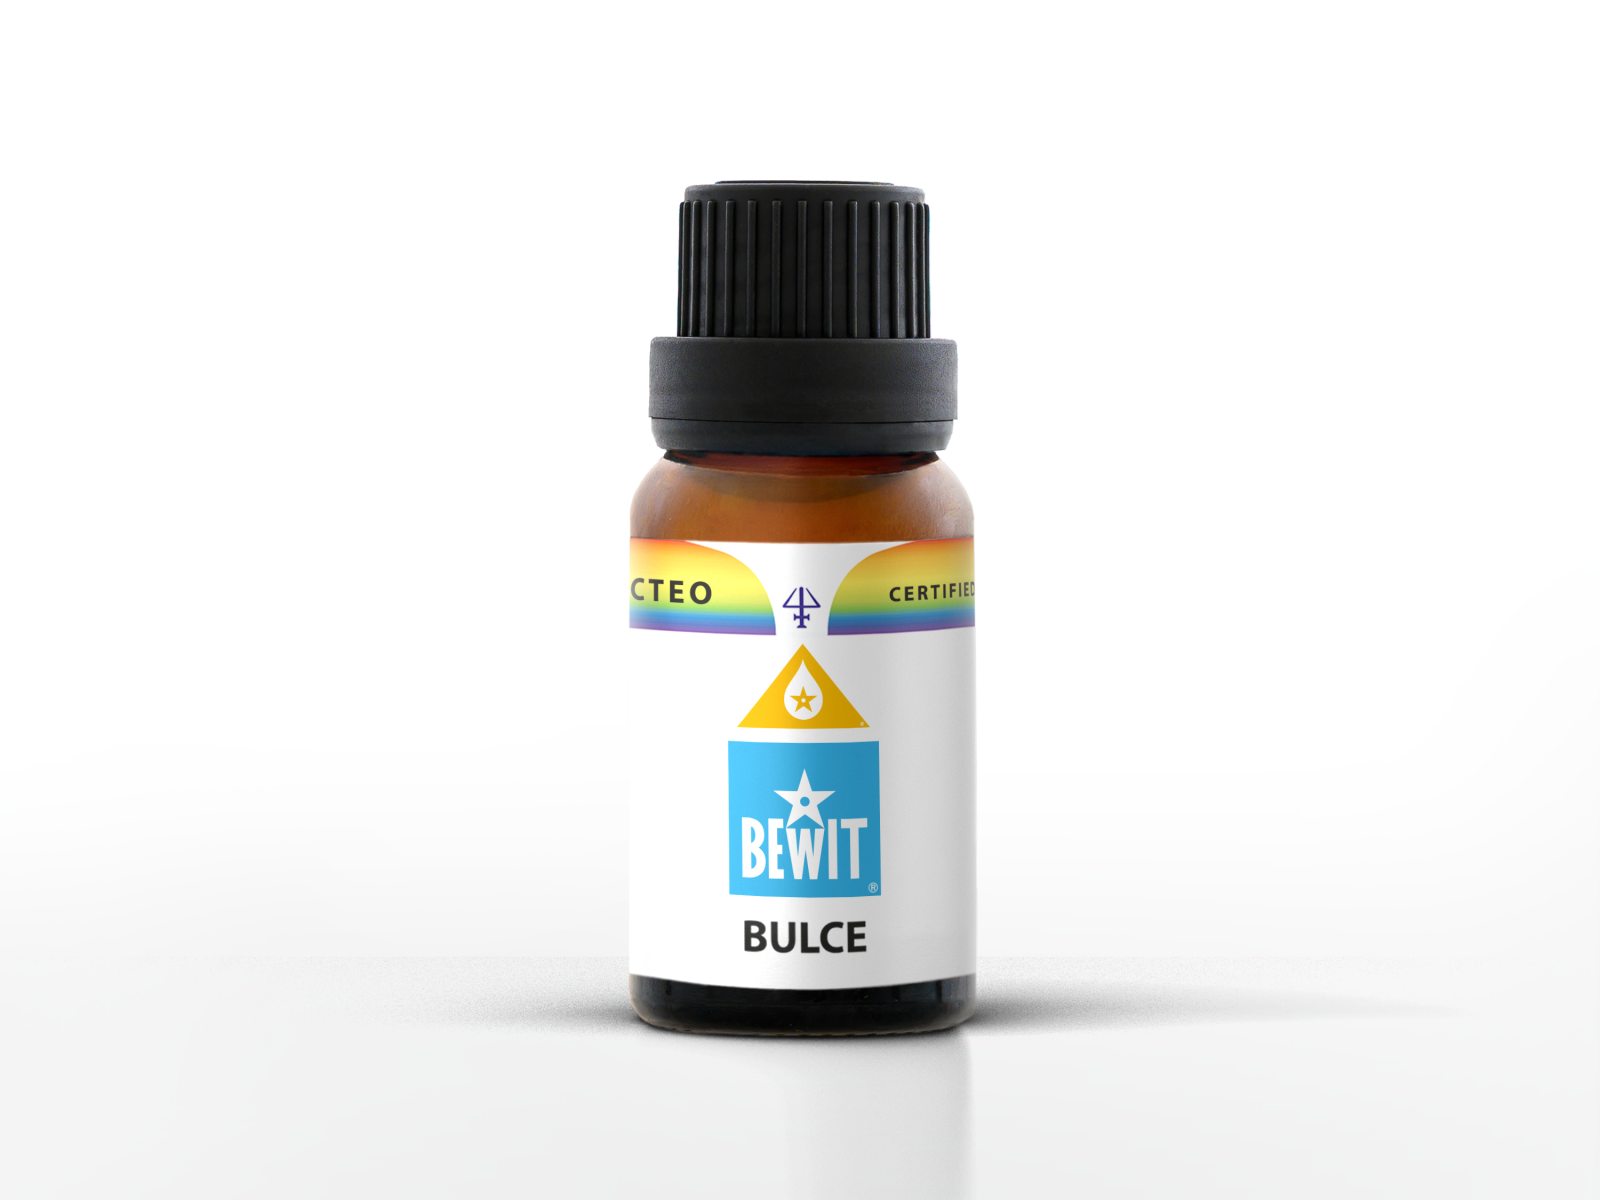 BEWIT BULCE - Blend of essential oils - 1